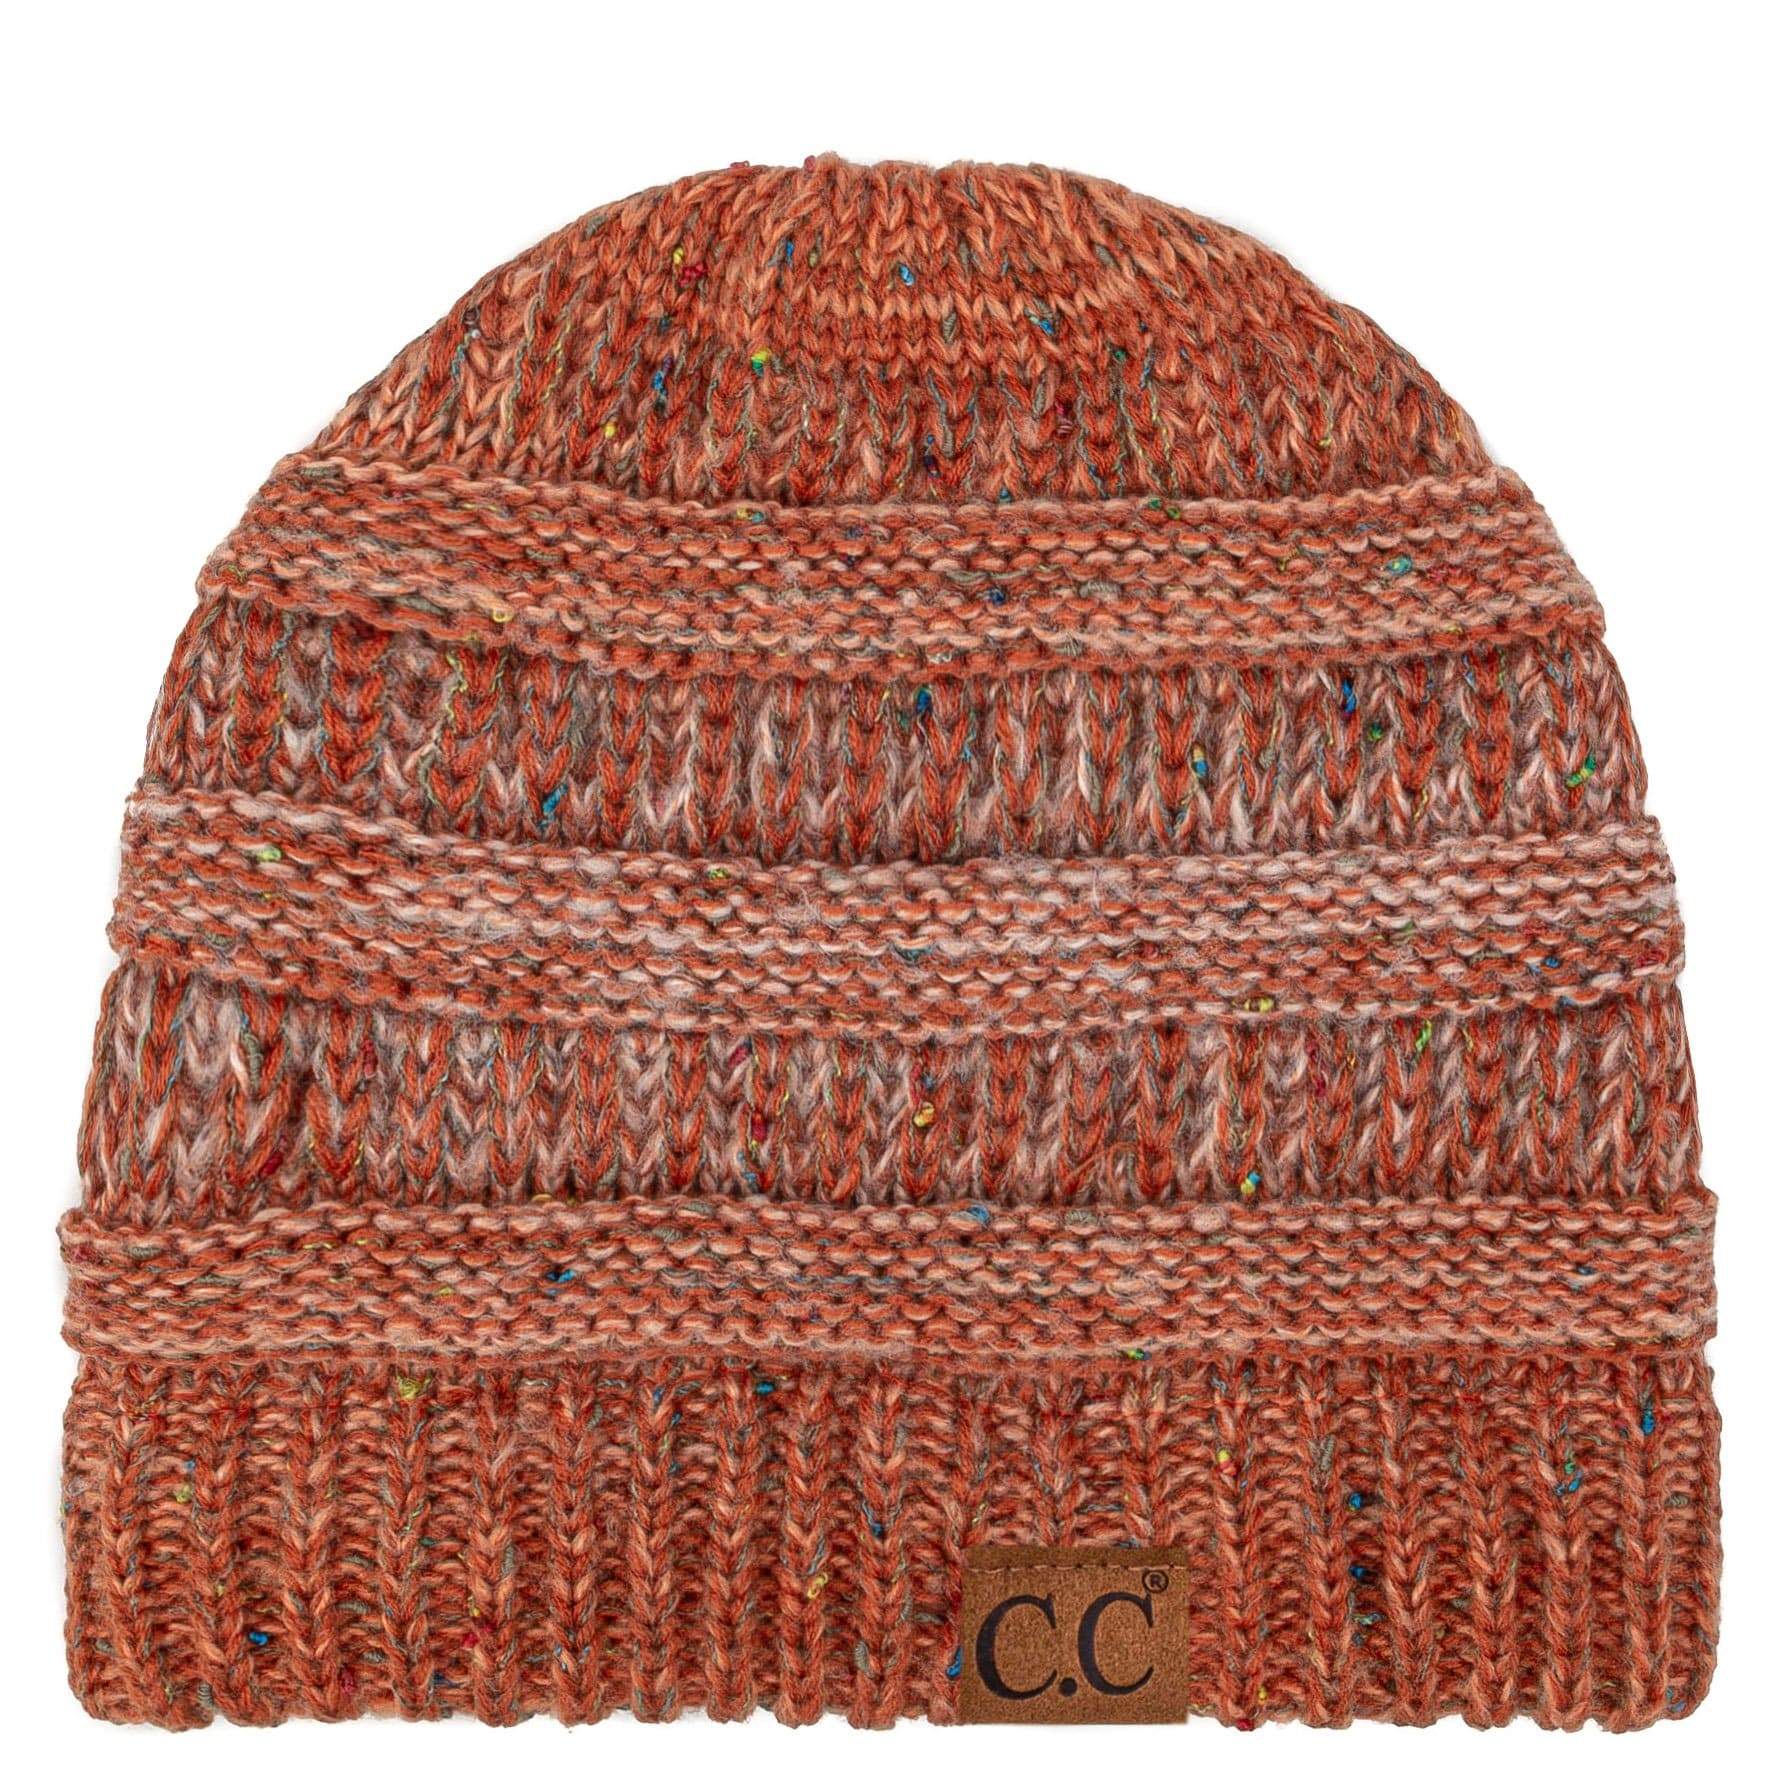 C.C Apparel Ombre Orange C.C Trendy Warm Chunky Soft Stretch Ombre Cable Knit Beanie Skully